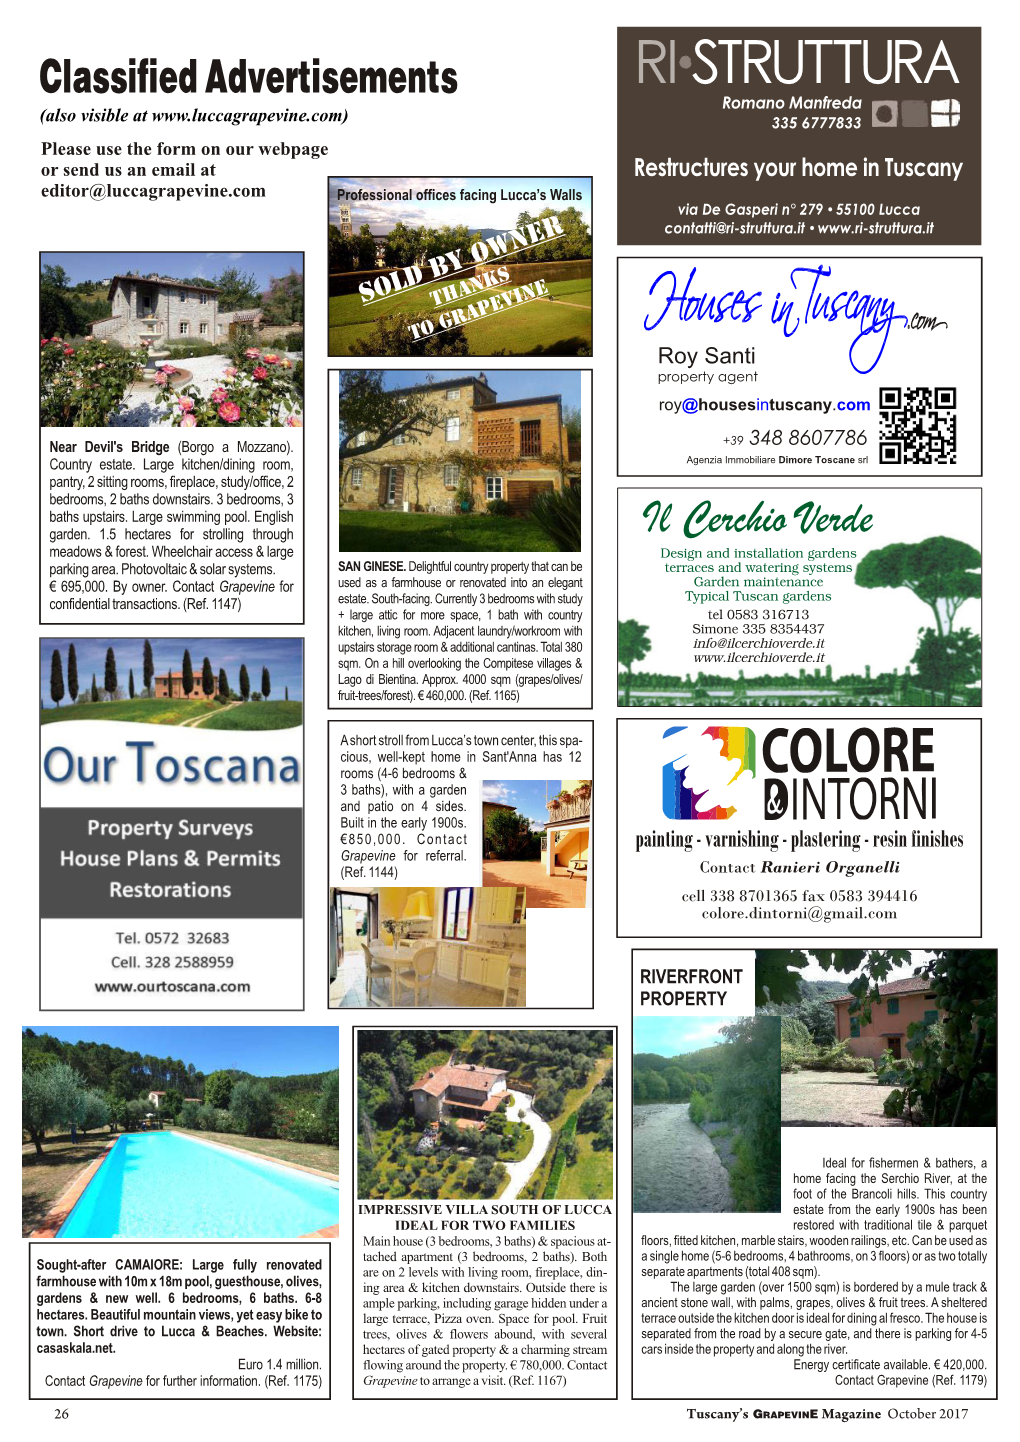 Classified Advertisements ~ October 2017 Issue